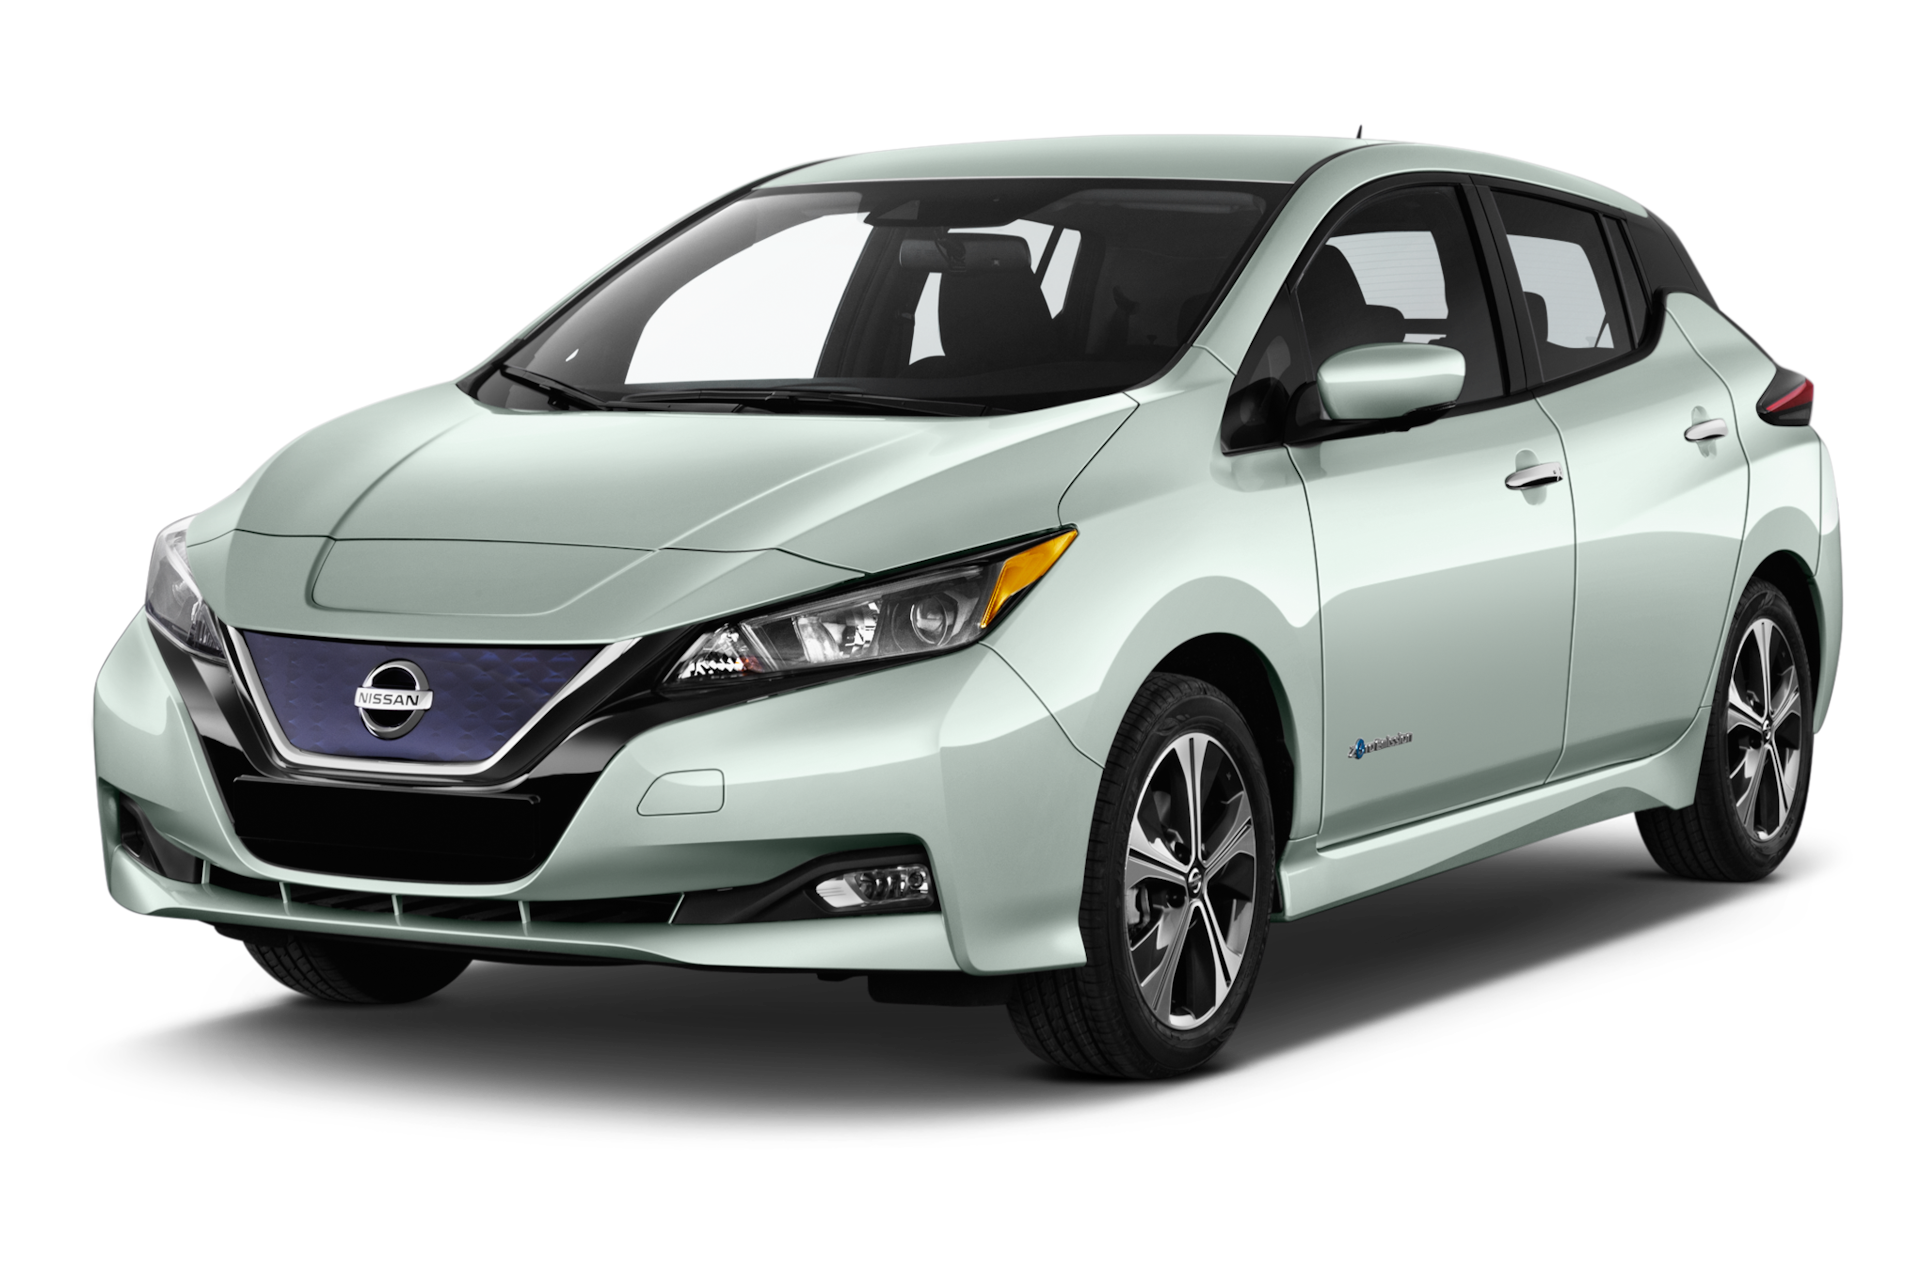 2019 Nissan LEAF Prices, Reviews, and Photos - MotorTrend